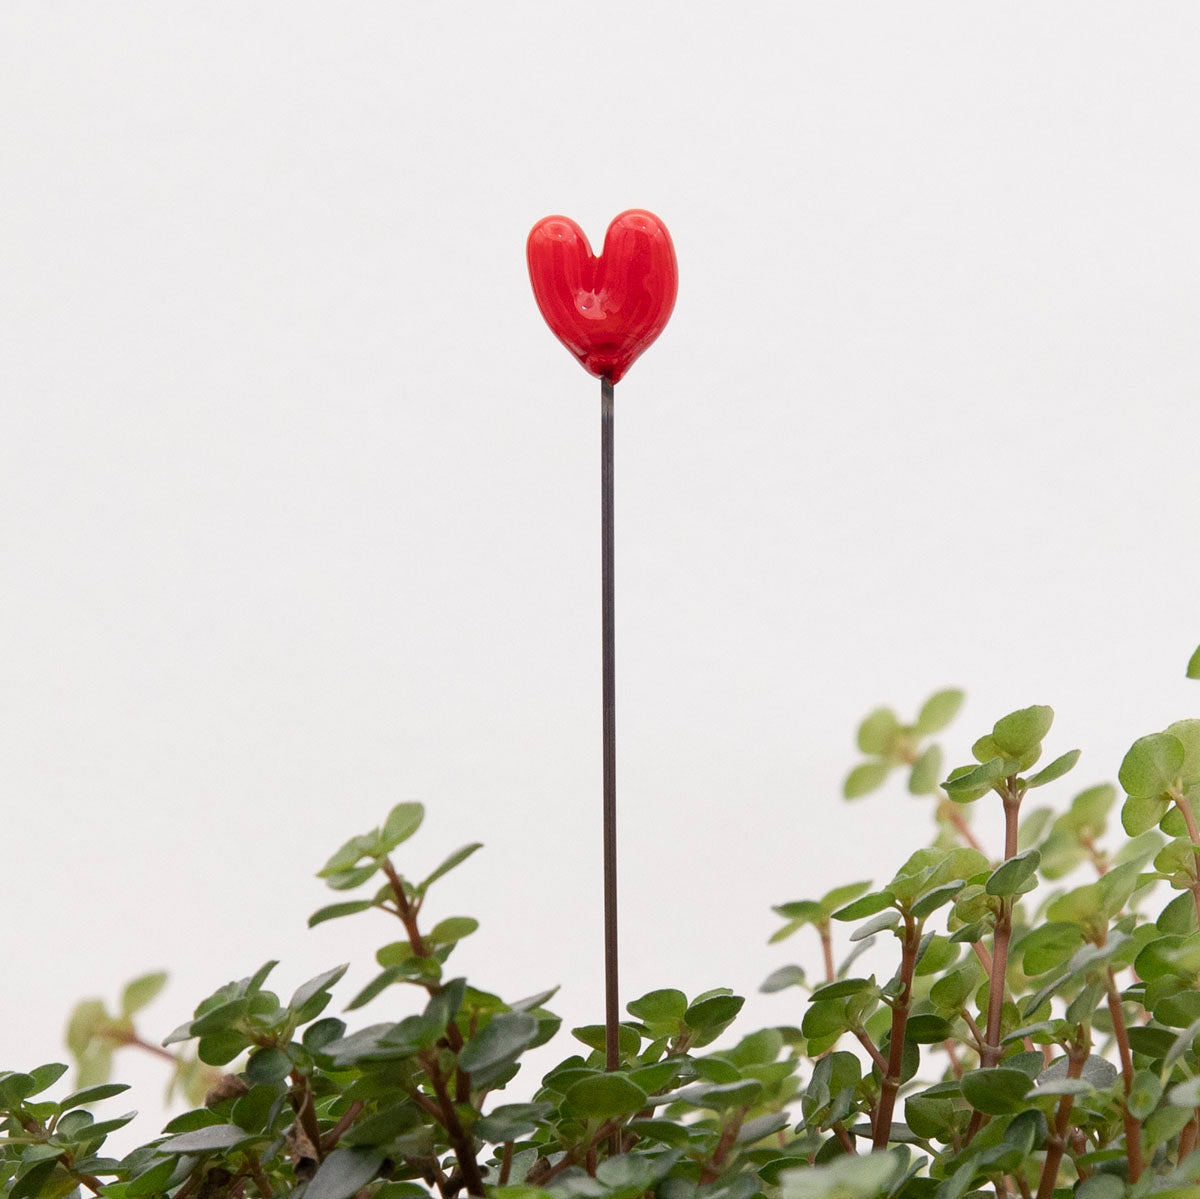 A small red glass heart on a metal stake site above a plant with tiny green leaves.